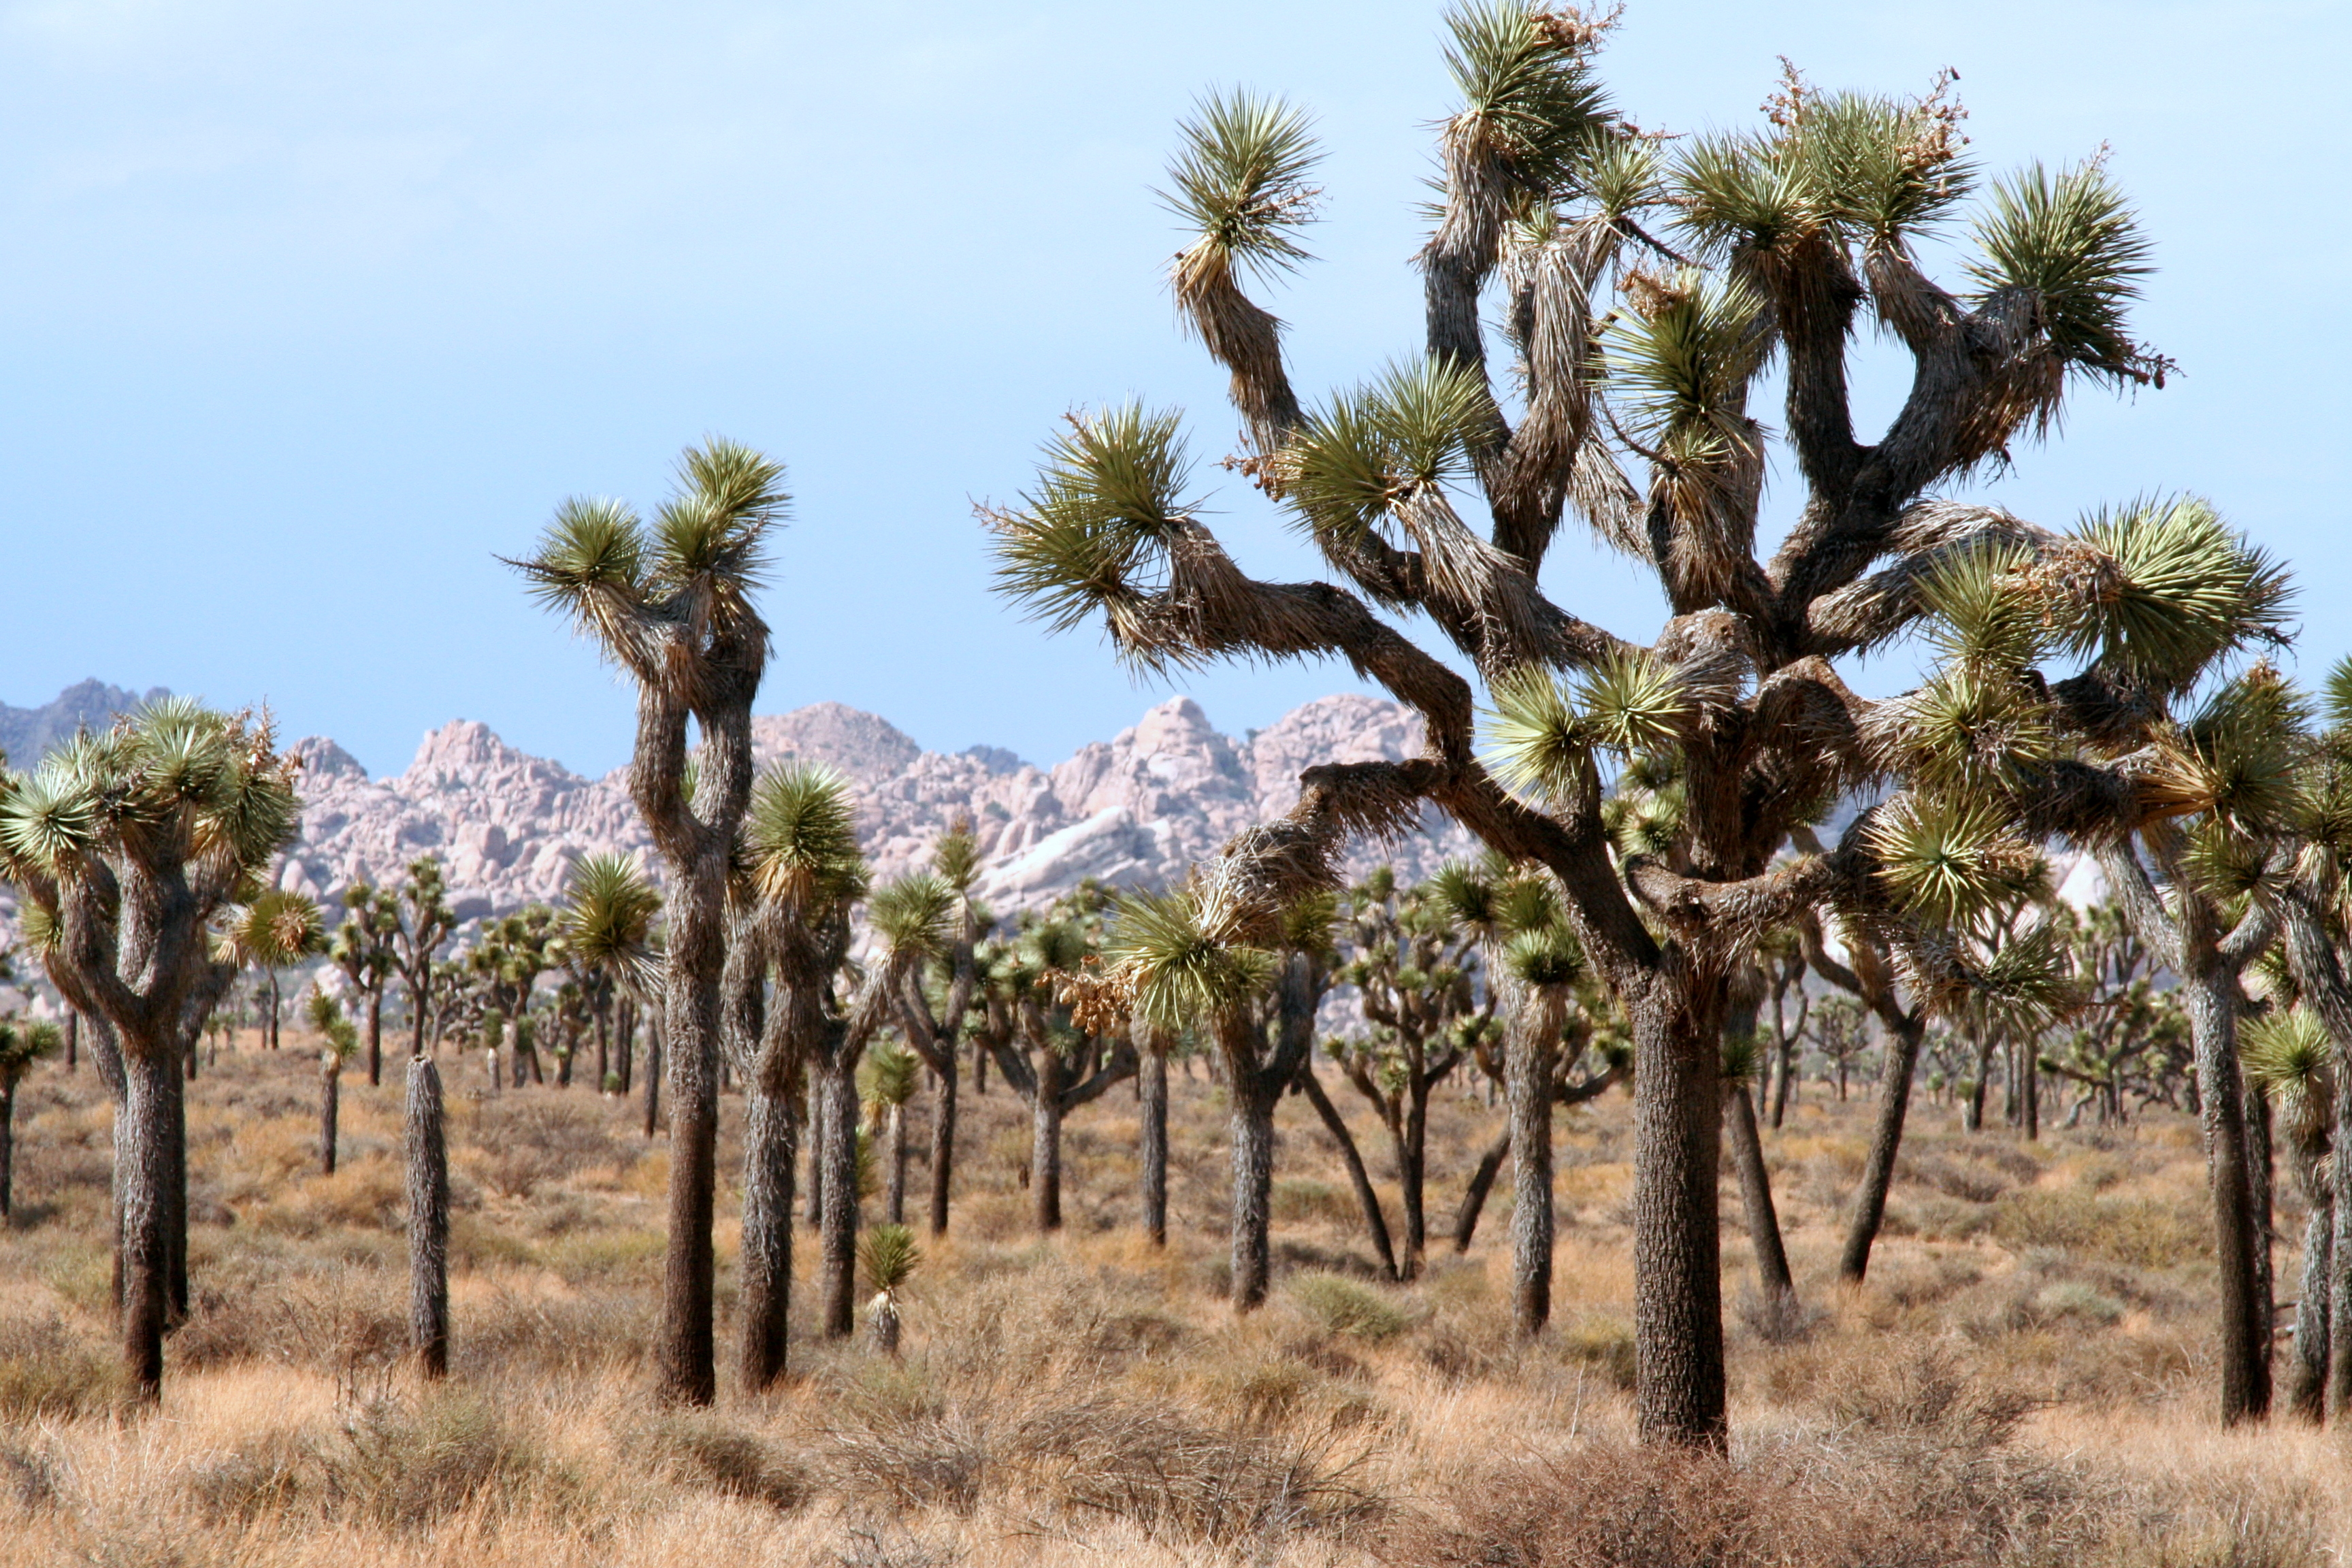 Spiky Leaves of the Joshua Tree – Travel with Intent